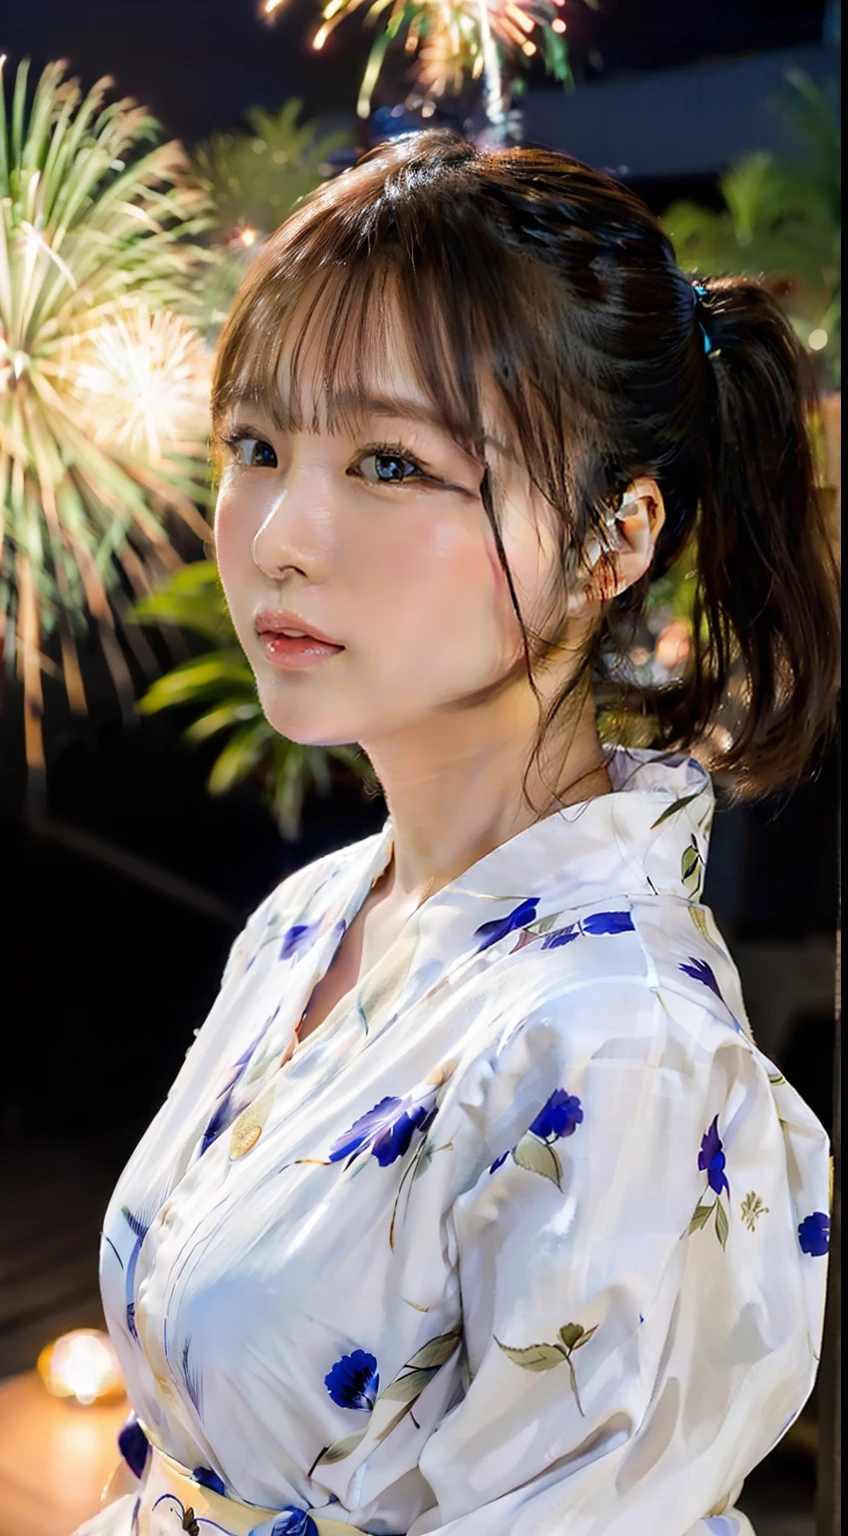 Top quality, fine detail, (beautiful one girl))), very detailed eyes and face, fireworks, yukata, looking up at fireworks, ponytail, big tear bag, double eyelids, profile